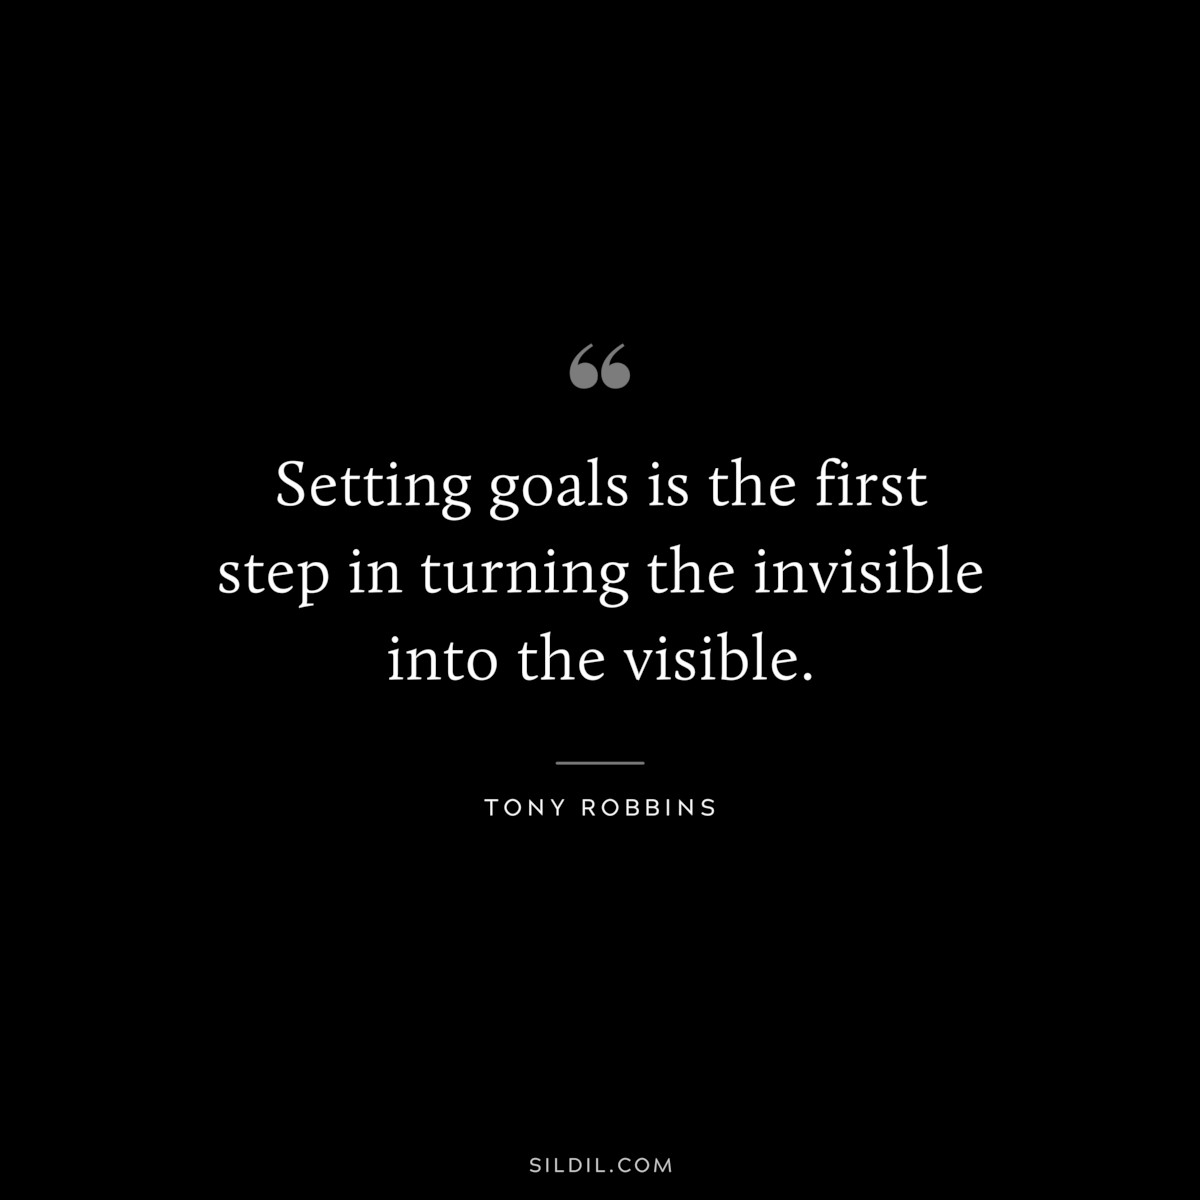 Setting goals is the first step in turning the invisible into the visible. ― Tony Robbins